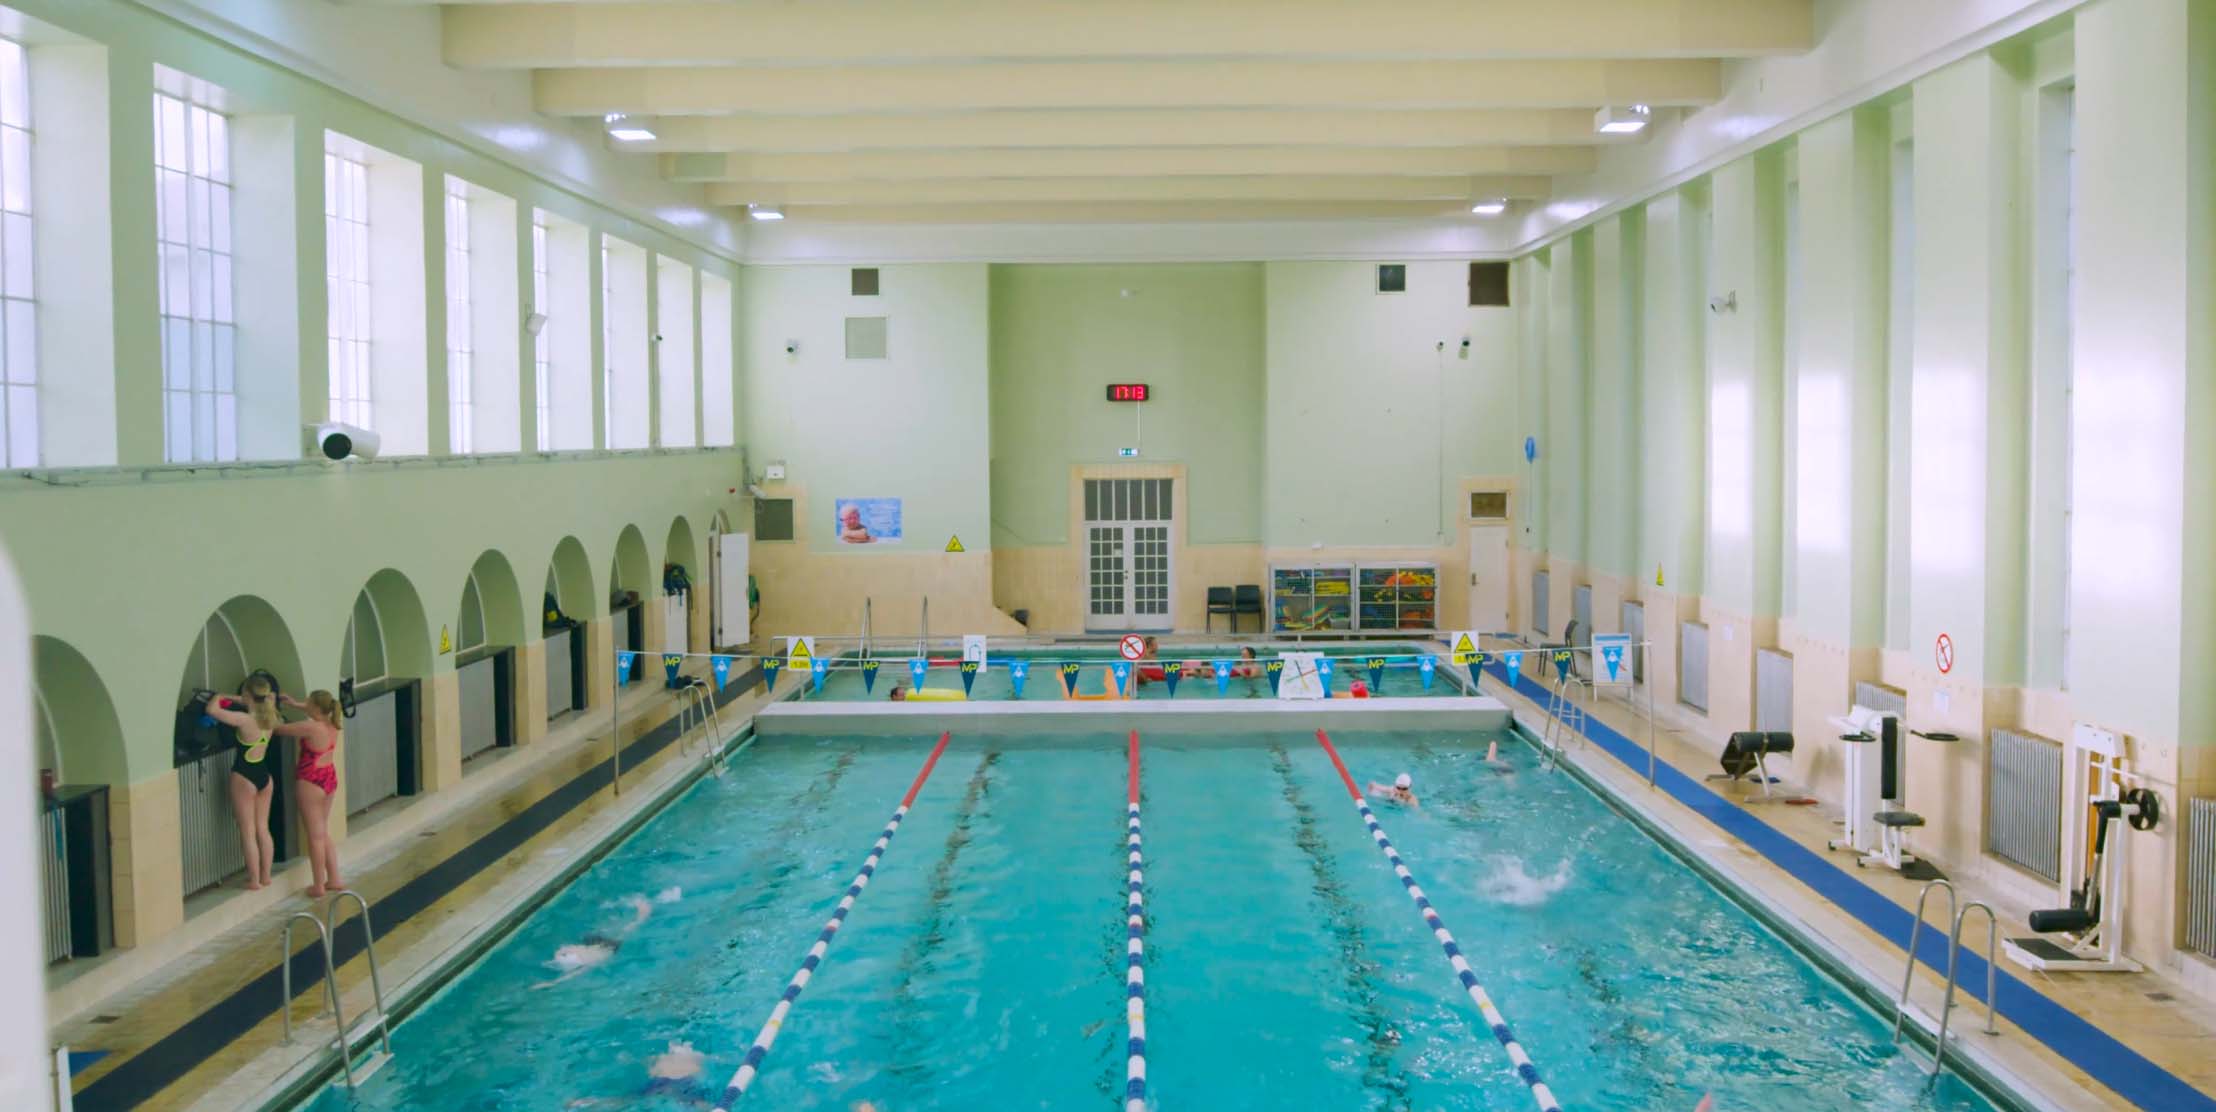 wide shot of indoor swimming pool with swimmers practicing